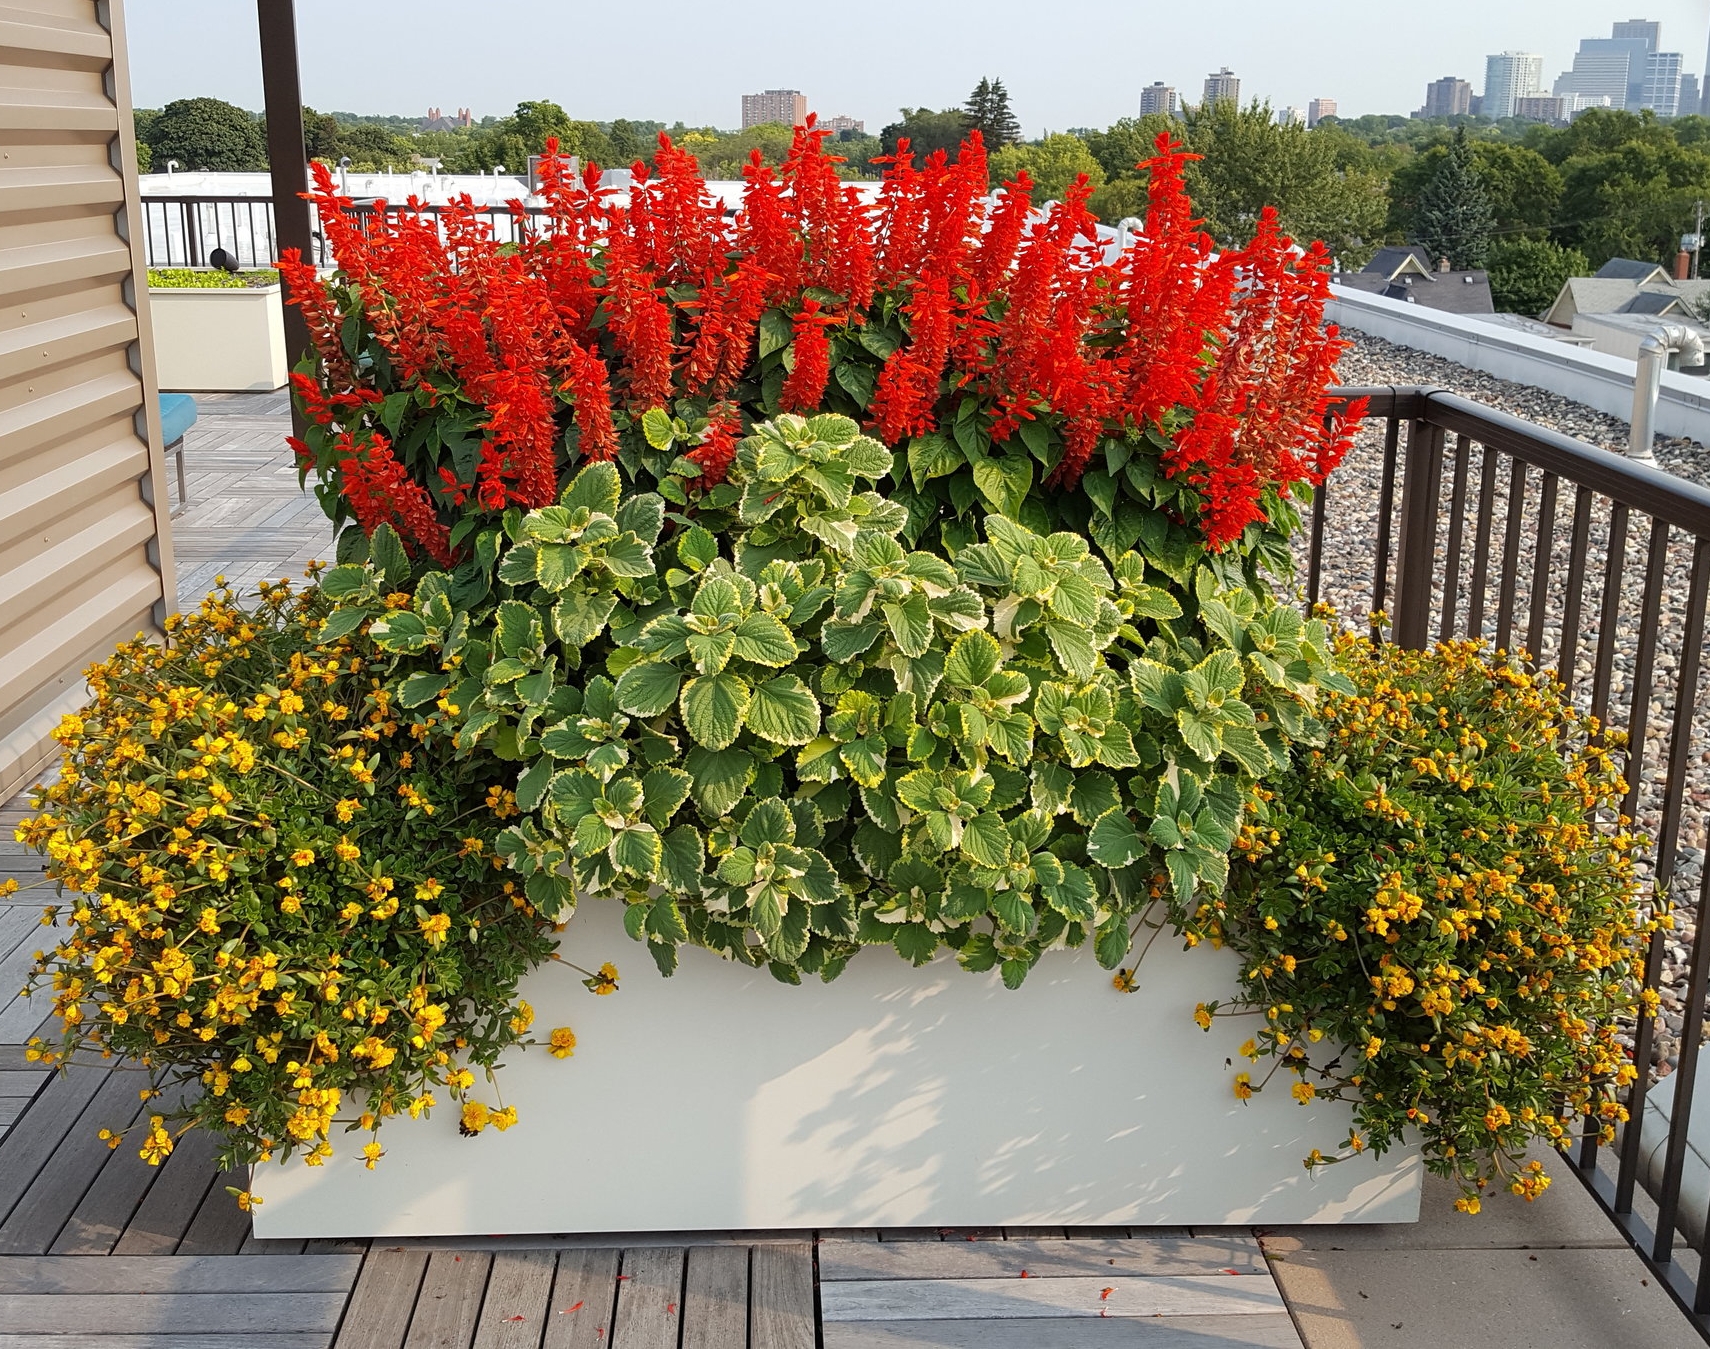 'Lighthouse Red' is tough and gorgeous in a rooftop planting.